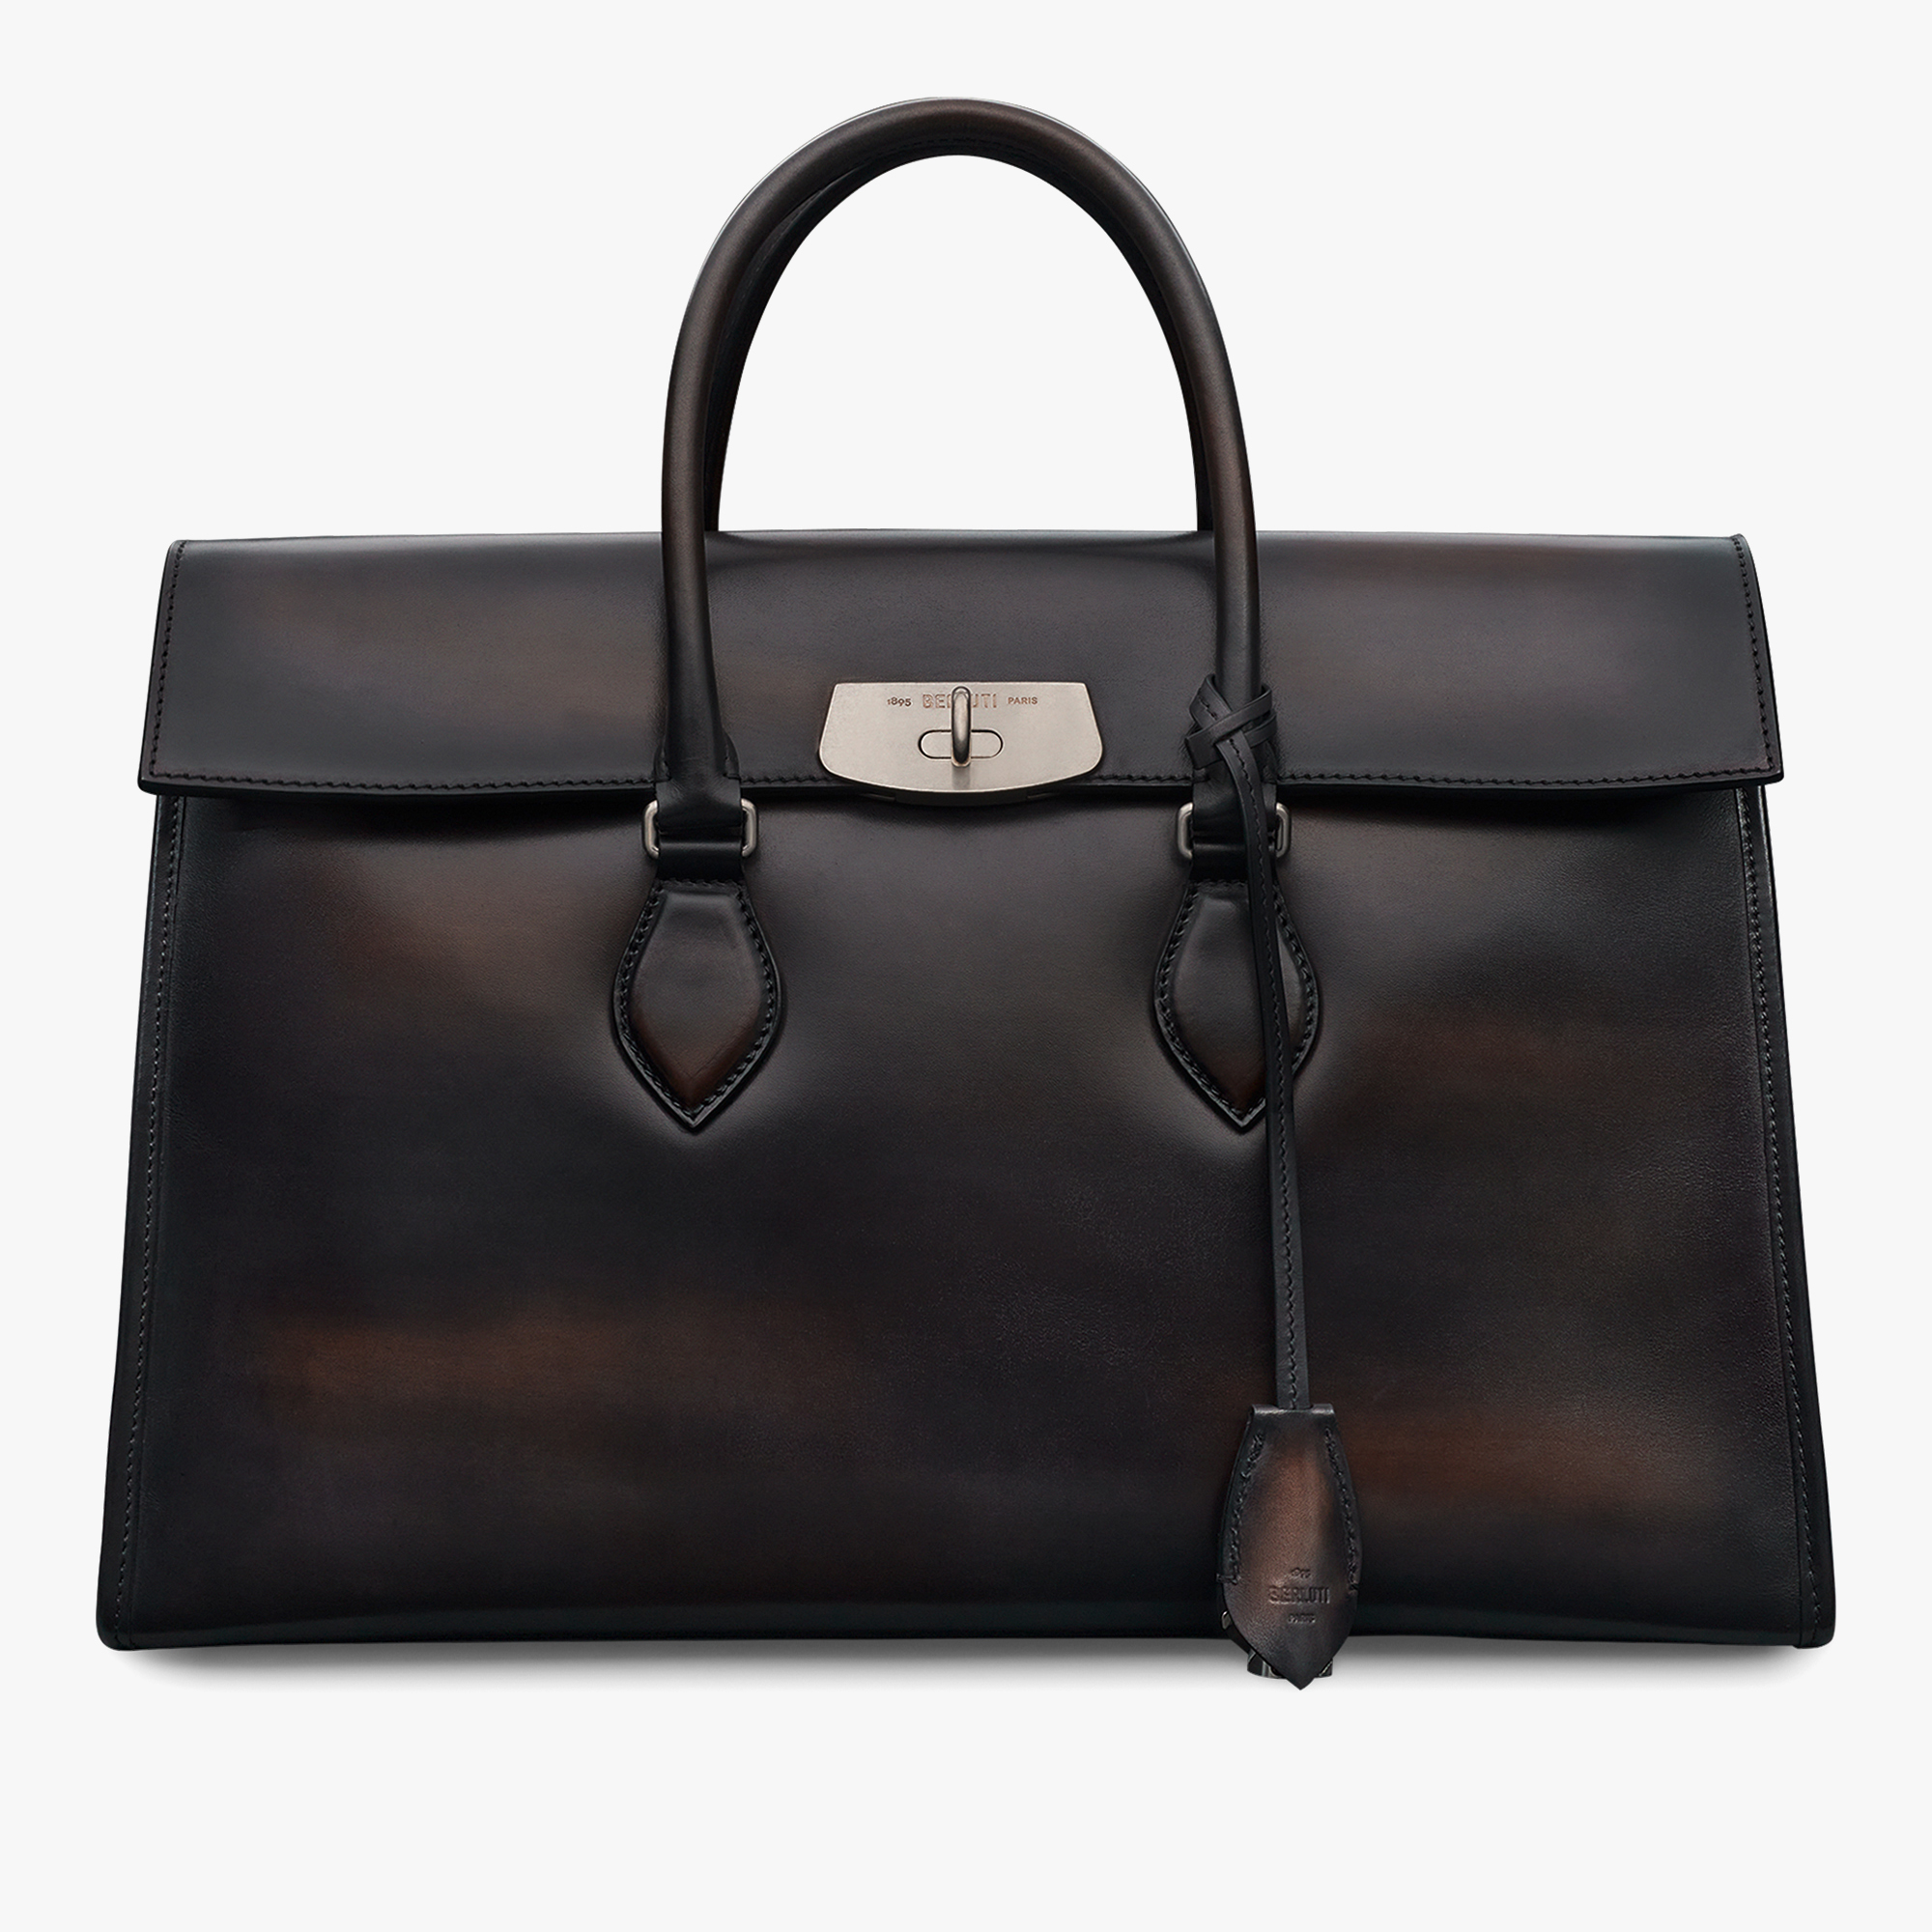 E'Mio Leather Briefcase, CHARCOAL BROWN, hi-res